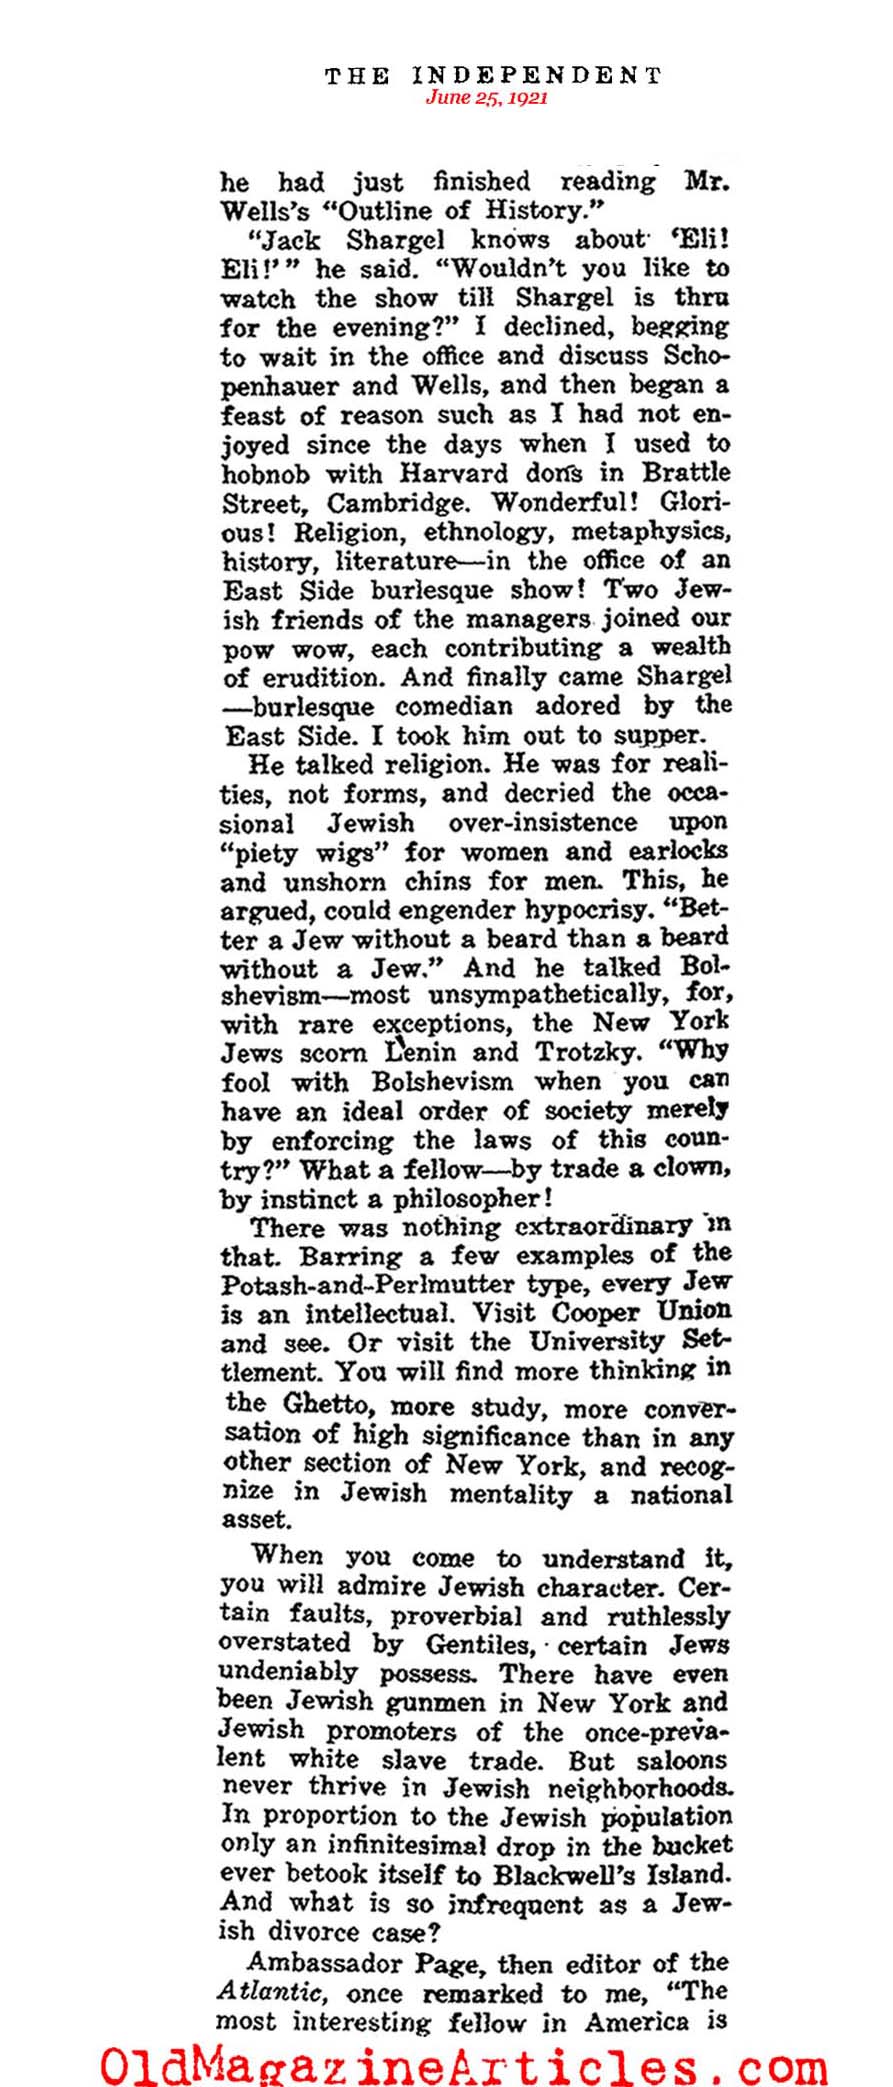 Jewish Population Growth in New York (The Independent, 1921)